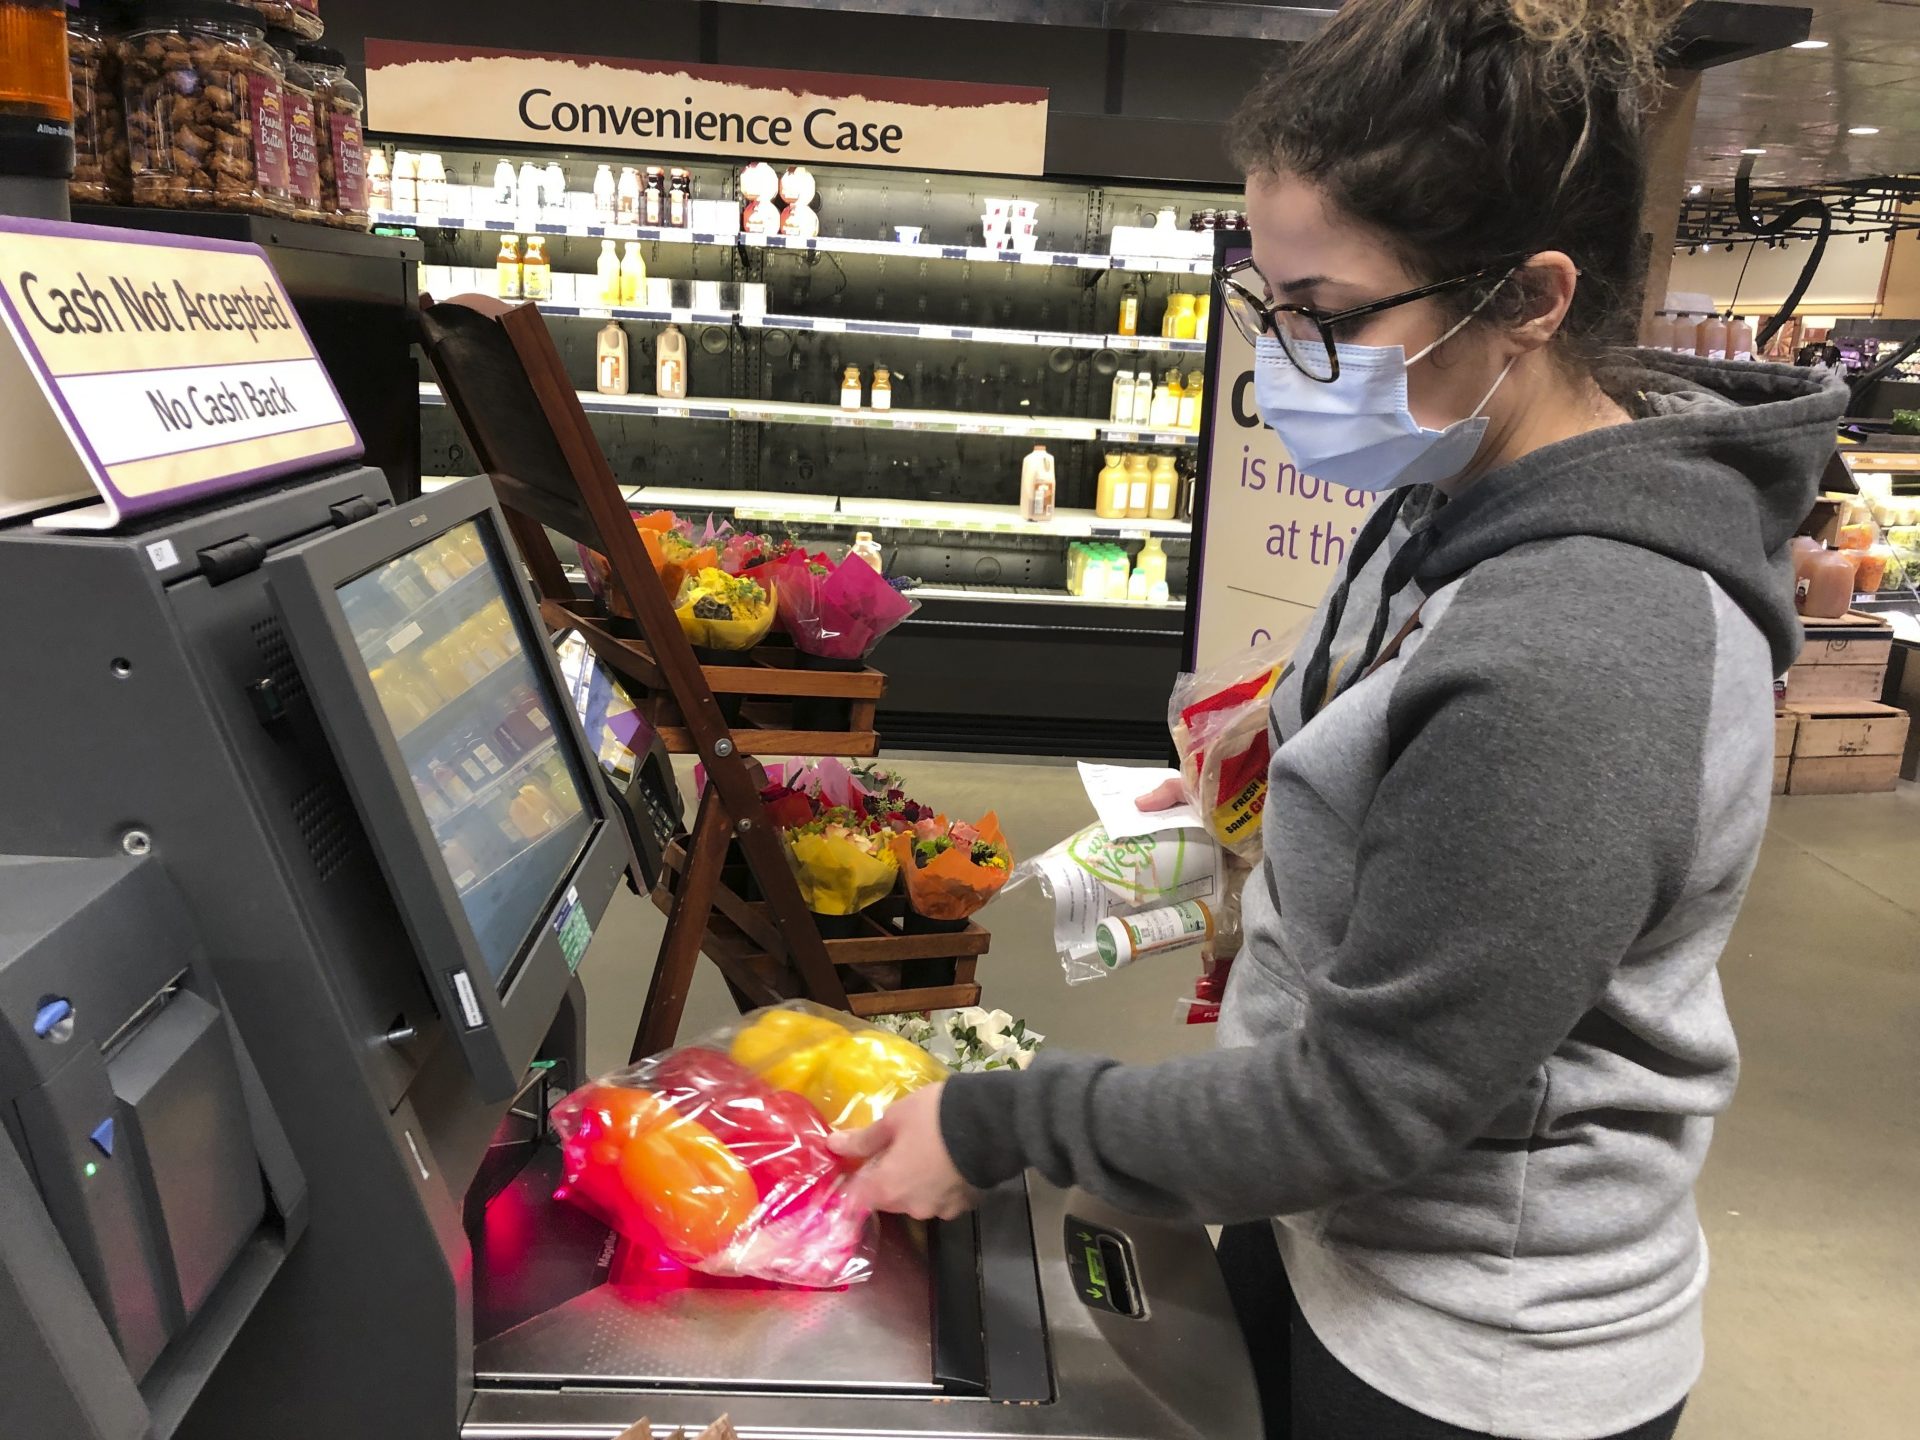 Wearing a surgical mask, Melissa Hall checks out of a Wegmans supermarket, Friday, March 13, 2020 in King of Prussia, Pa., Gov. Tom Wolf ordered schools, community centers, gyms and other venues in Montgomery County, a Philadelphia suburb, to shut down for two weeks amid a concentration of novel coronavirus cases there.